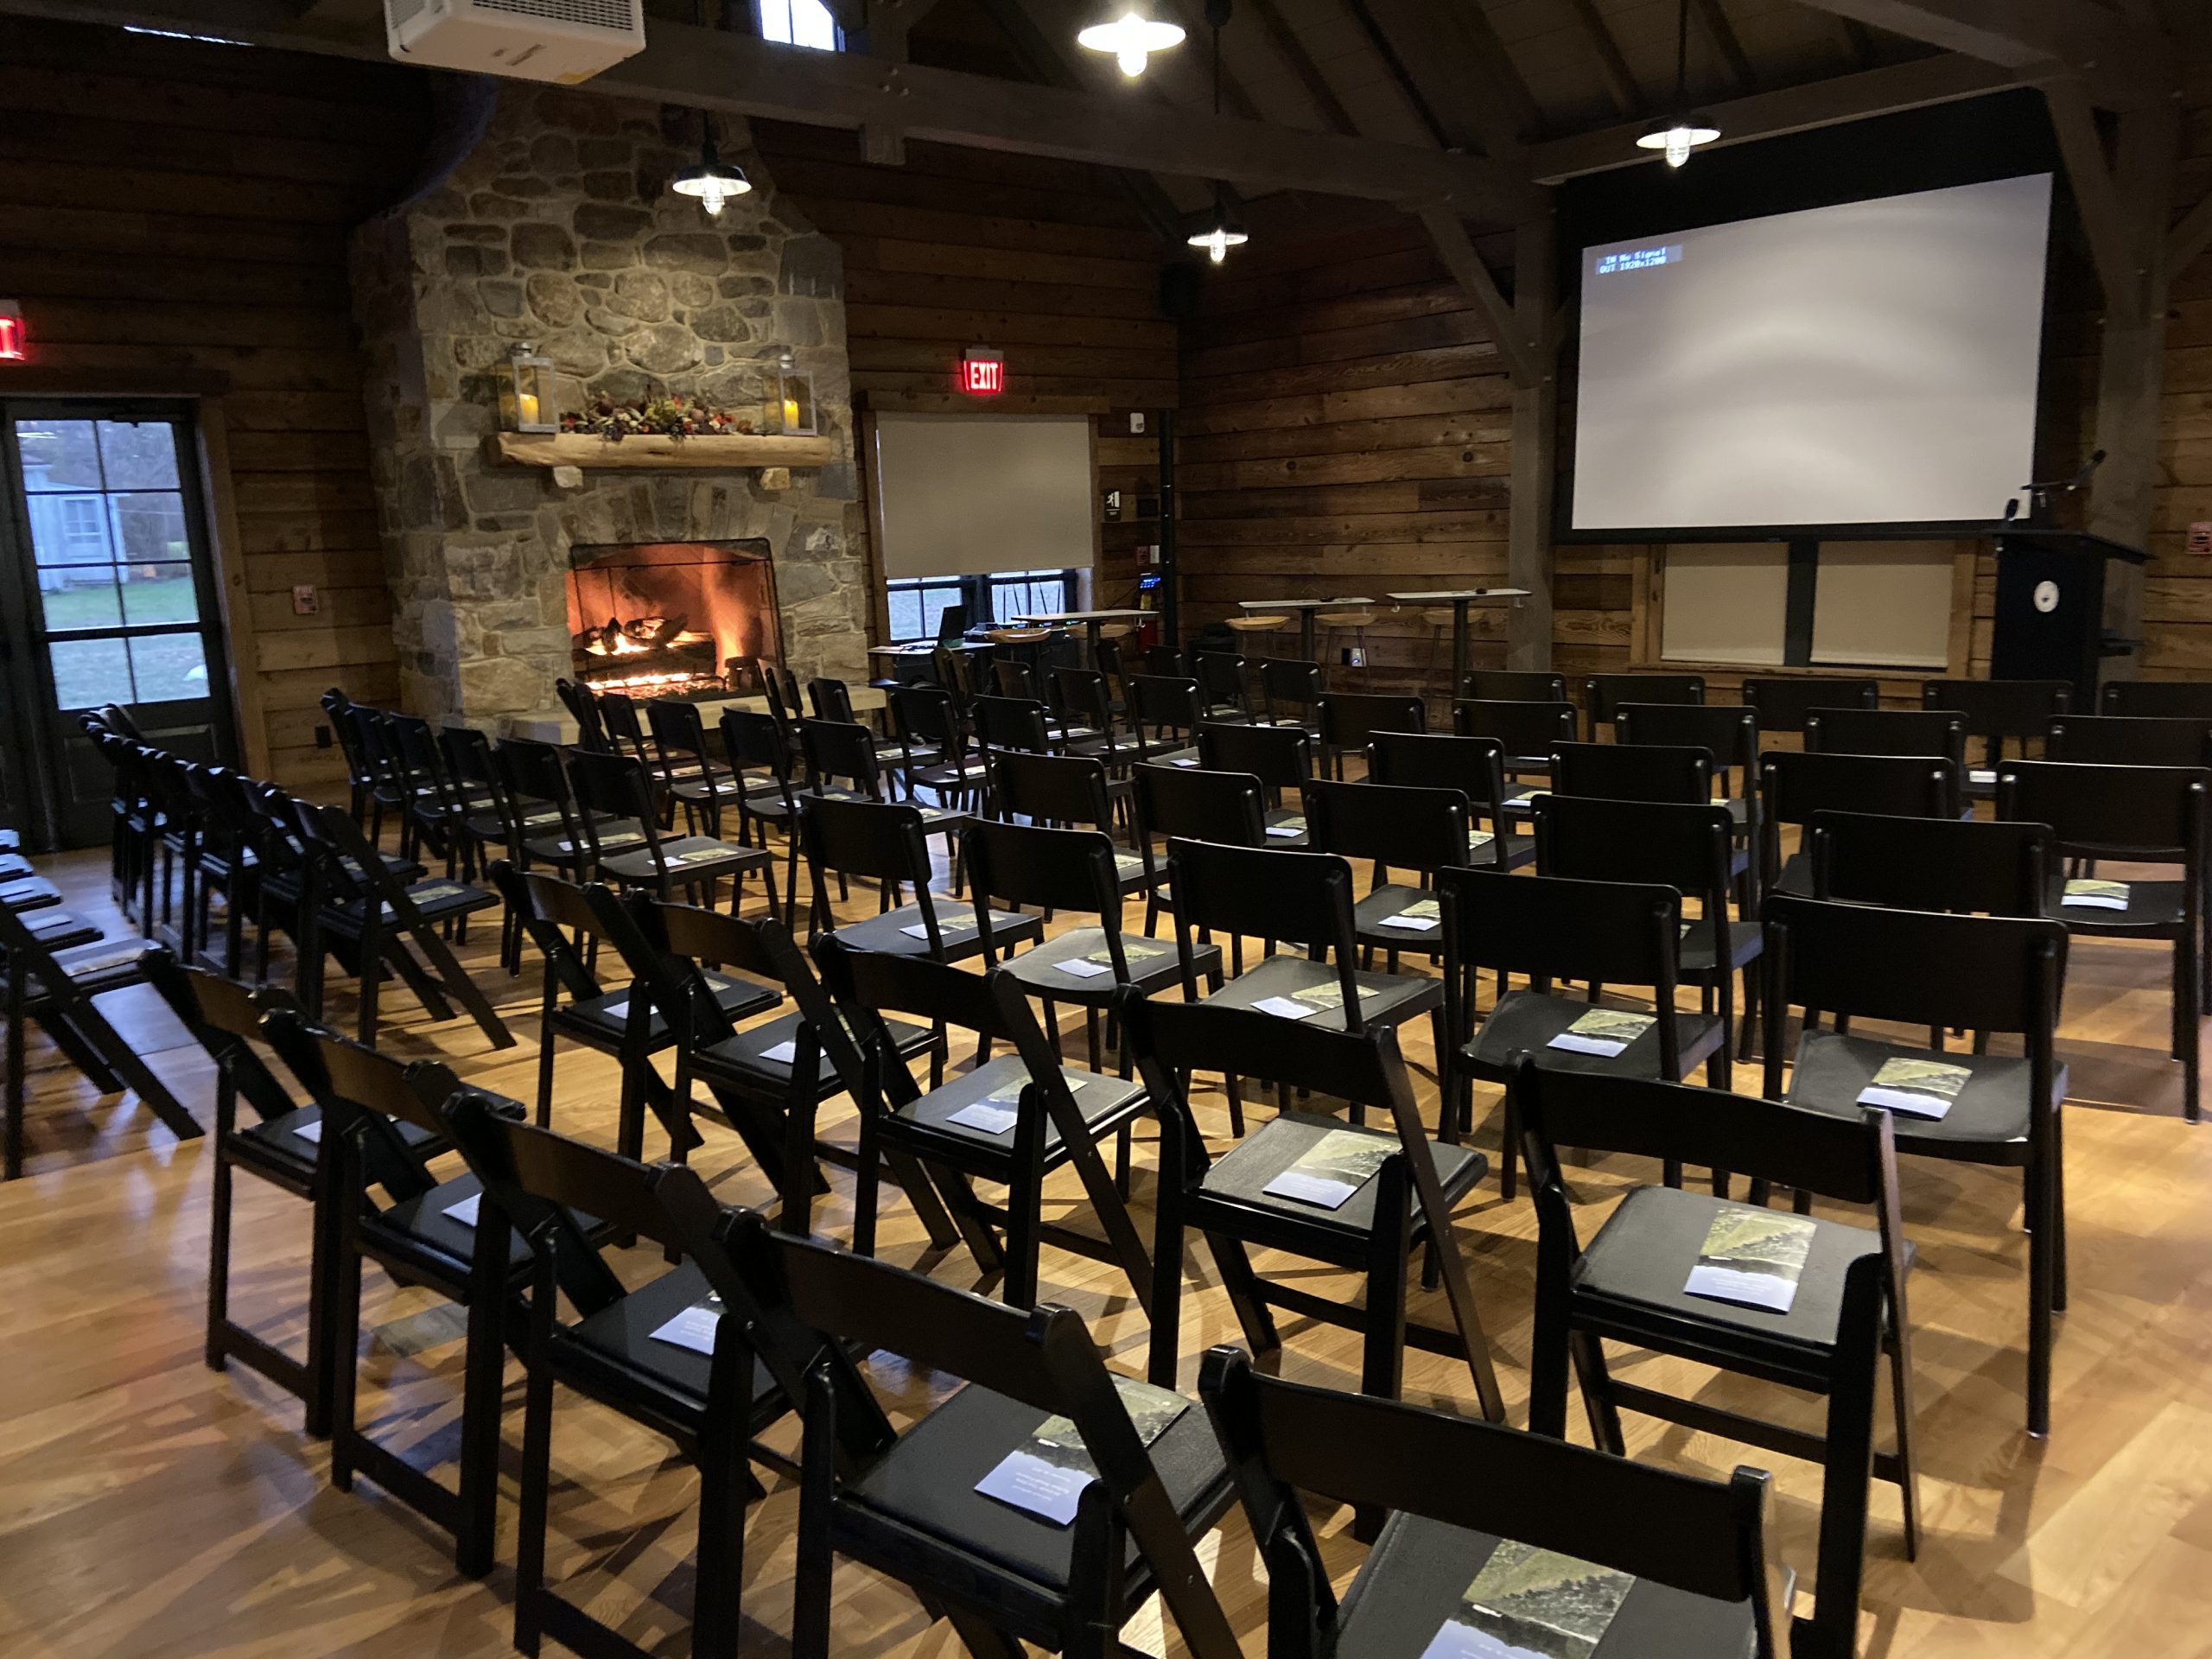 Seating for lecture, panel discussion or film screening